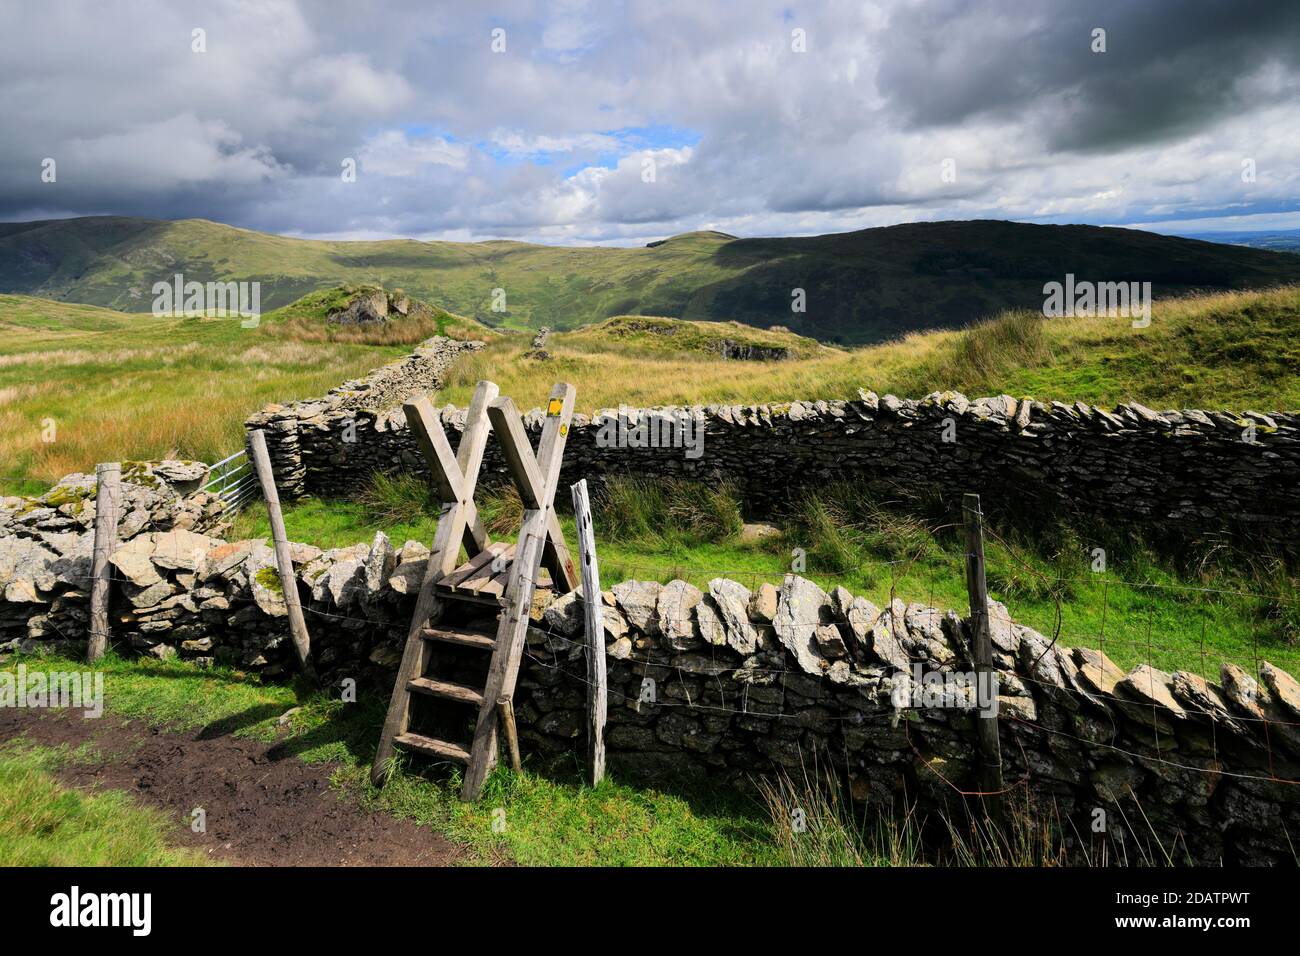 Footpath style on Wansfell fell, Troutbeck village, Kirkstone pass, Lake District National Park, Cumbria, England, UK Wansfell fell is one of the 214 Stock Photo